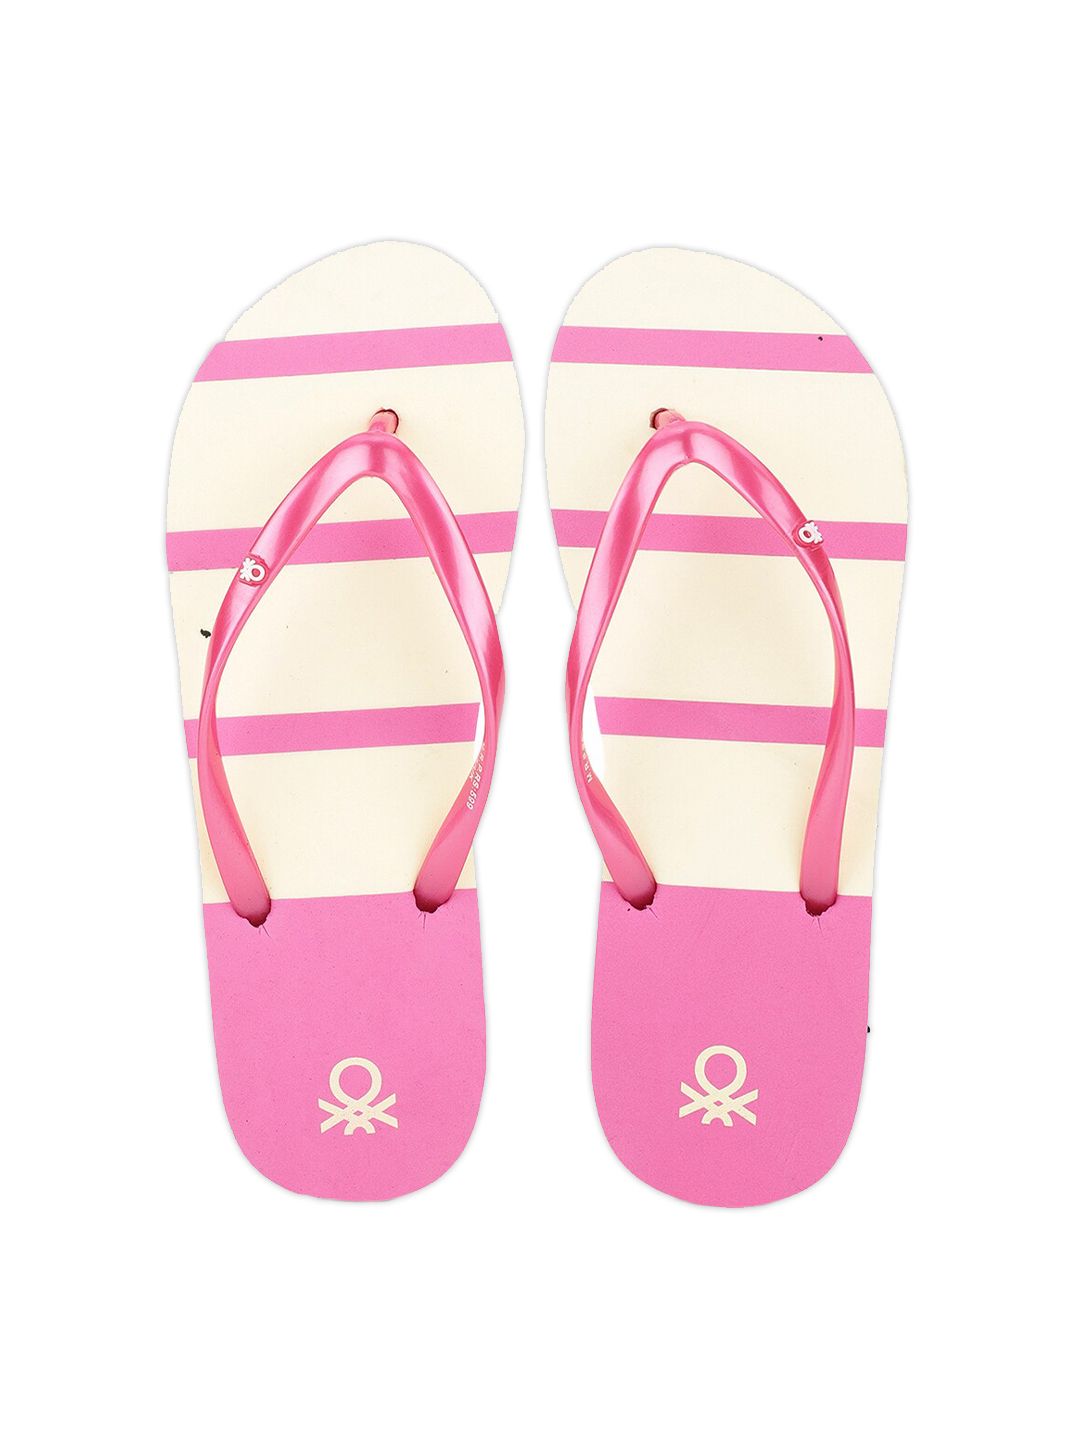 United Colors of Benetton Women Pink & White Striped Flip Flops Price in India